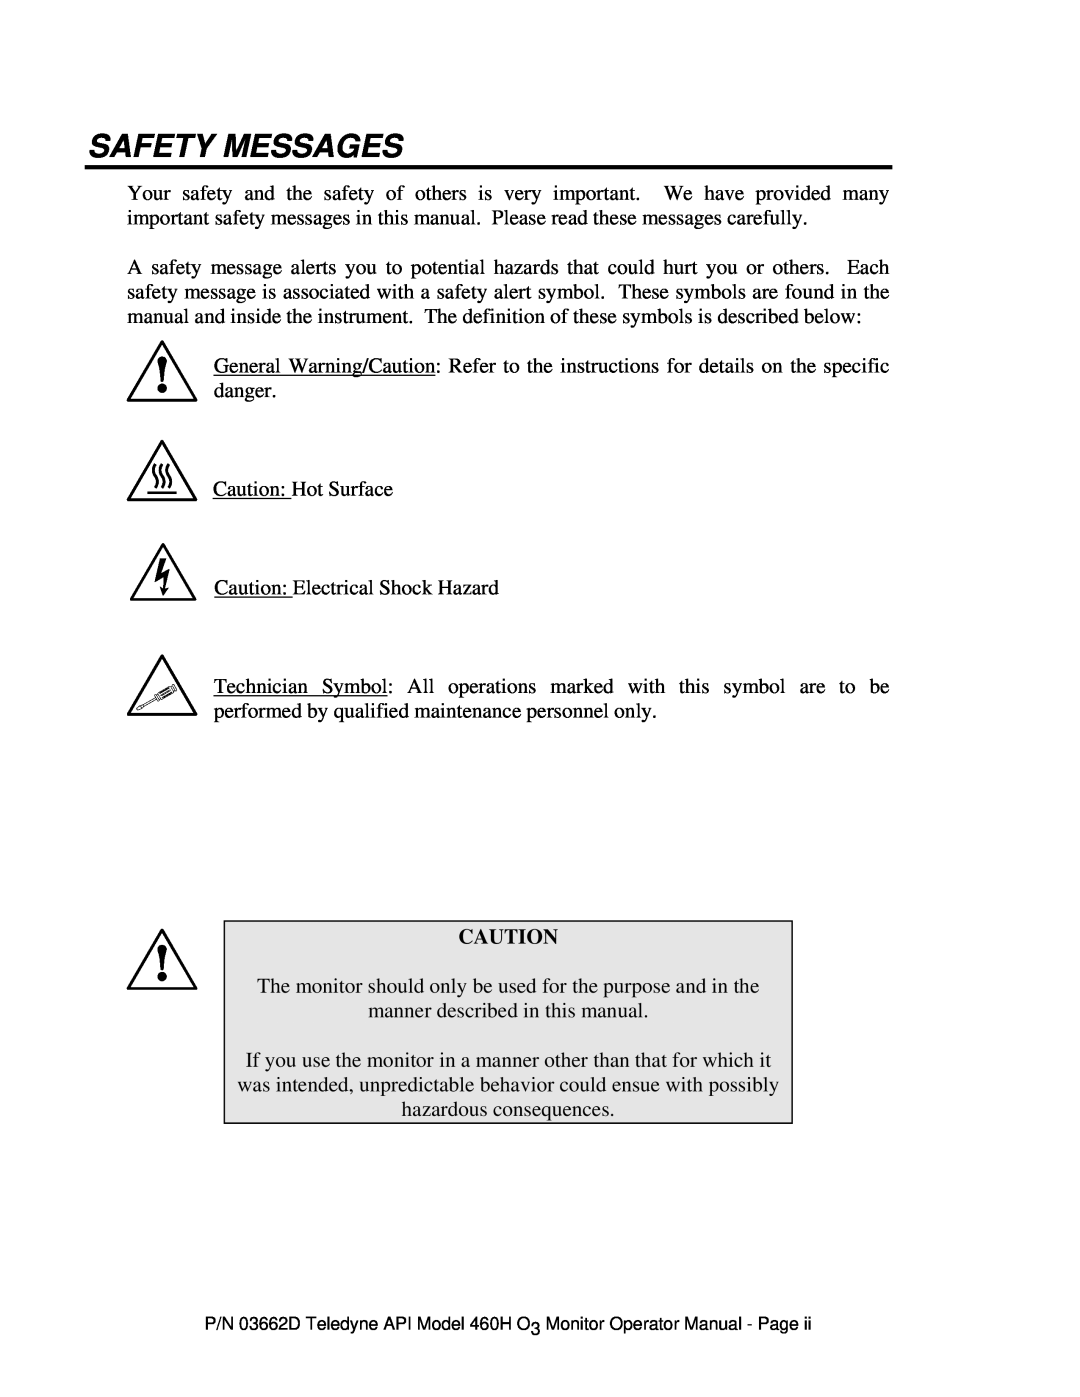 Teledyne 460H instruction manual Safety Messages 